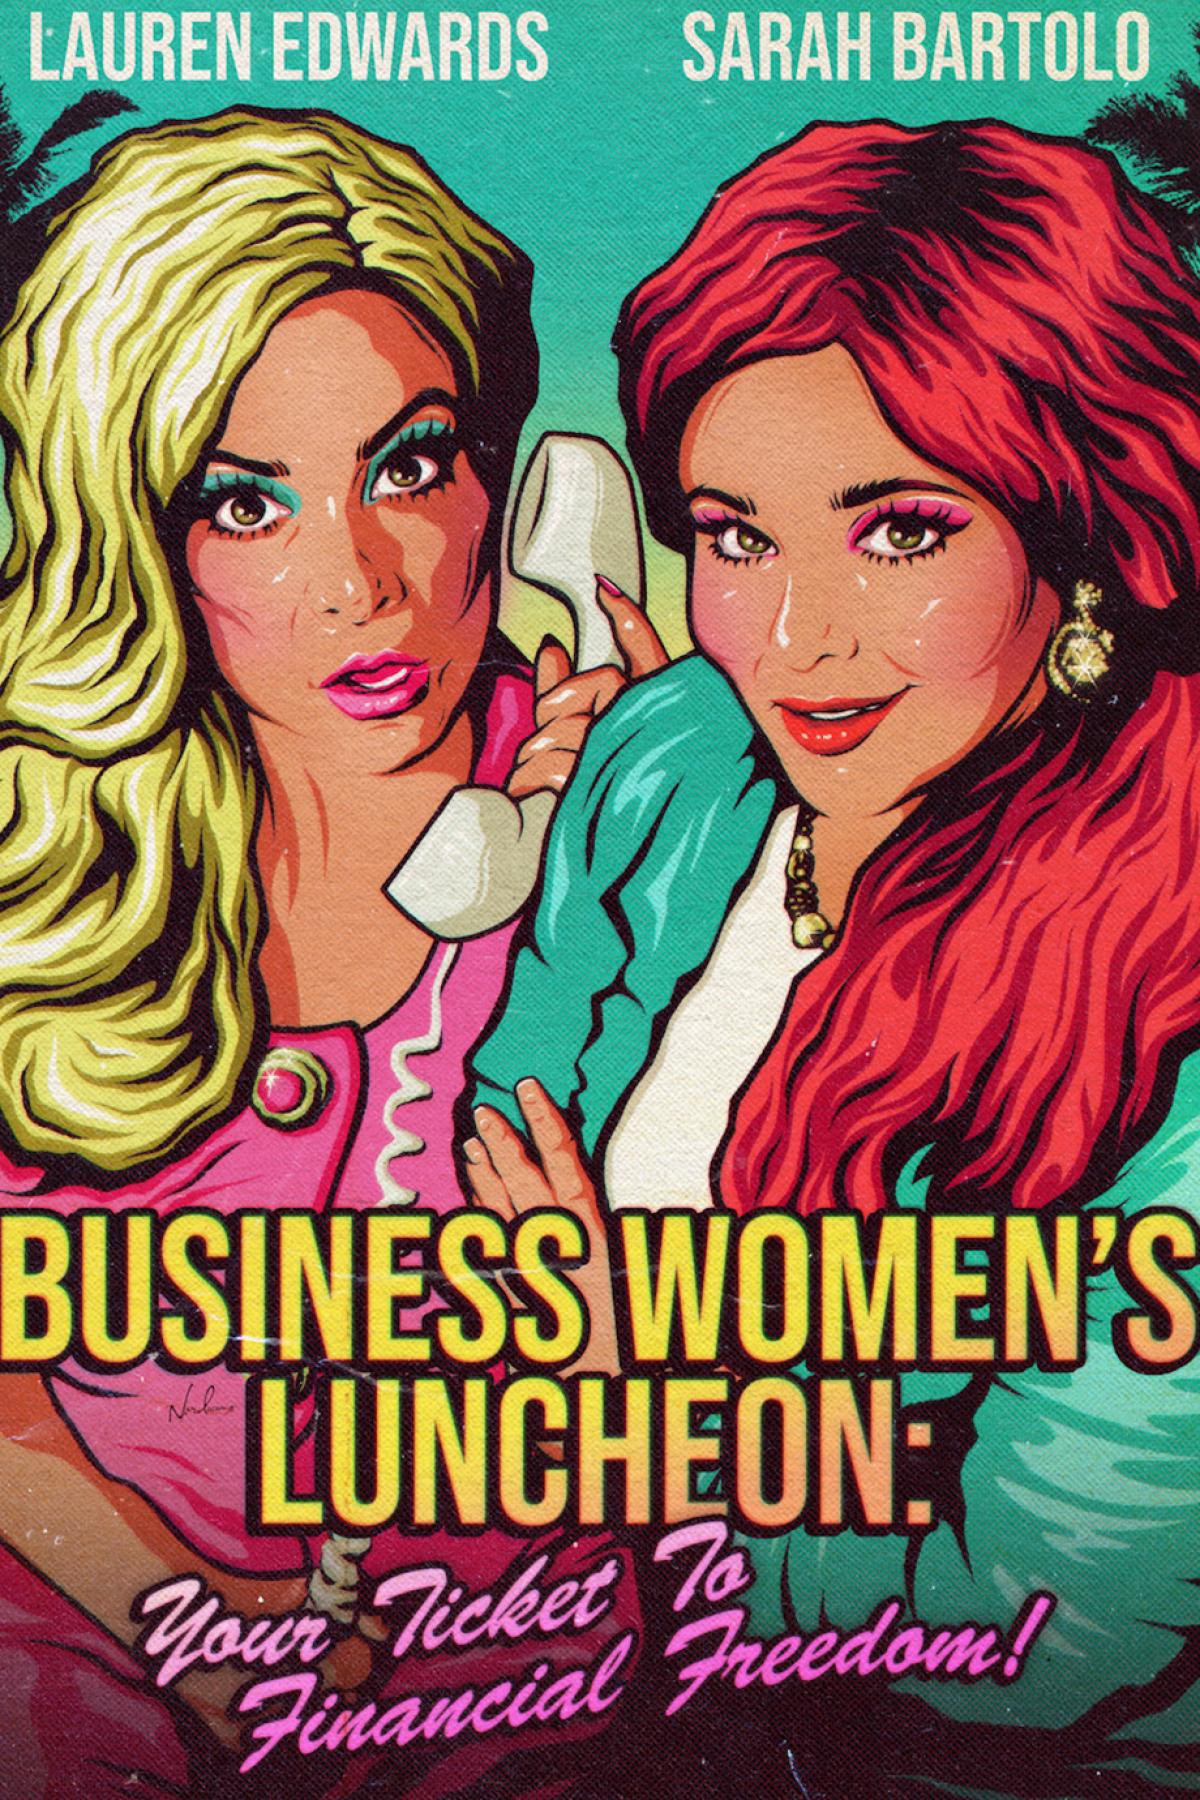 Business Women's Luncheon: Your Ticket to Financial Freedom